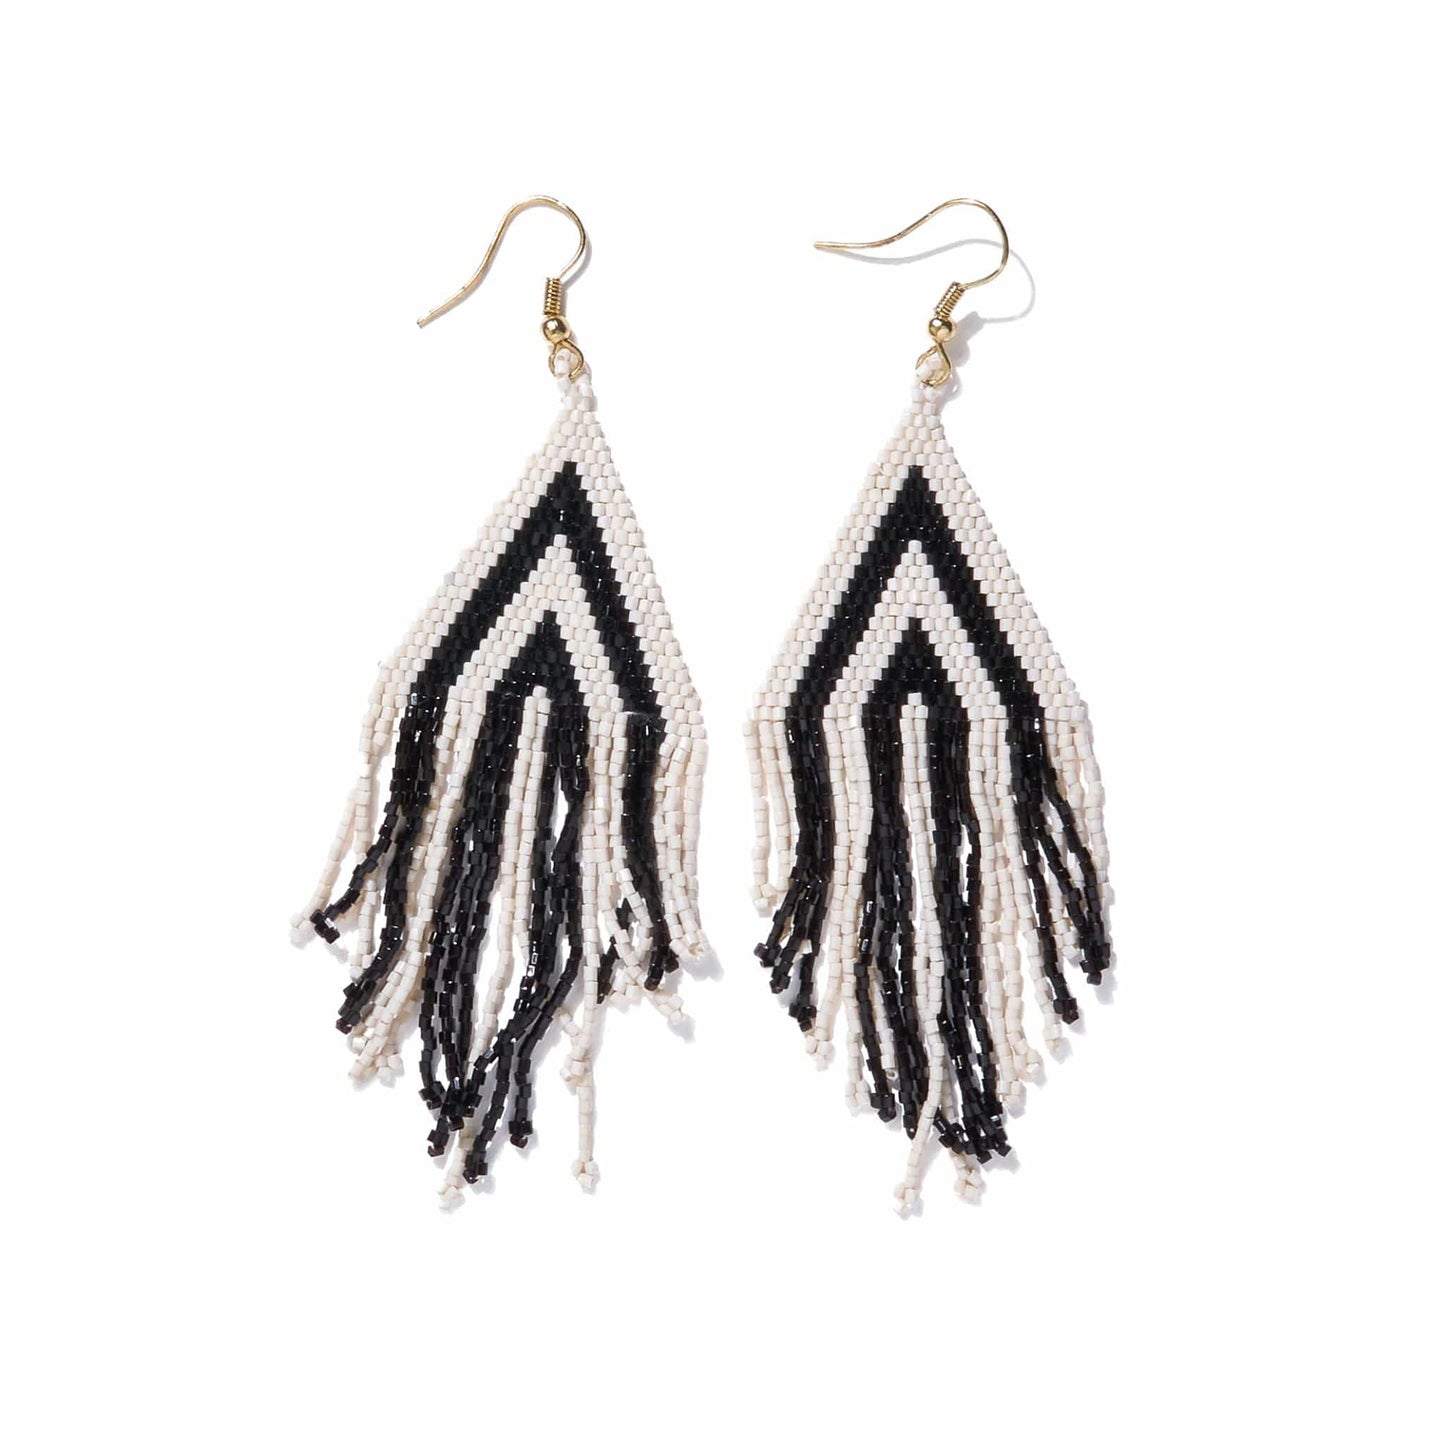 HALEY STACKED TRIANGLE BEADED EARRINGS